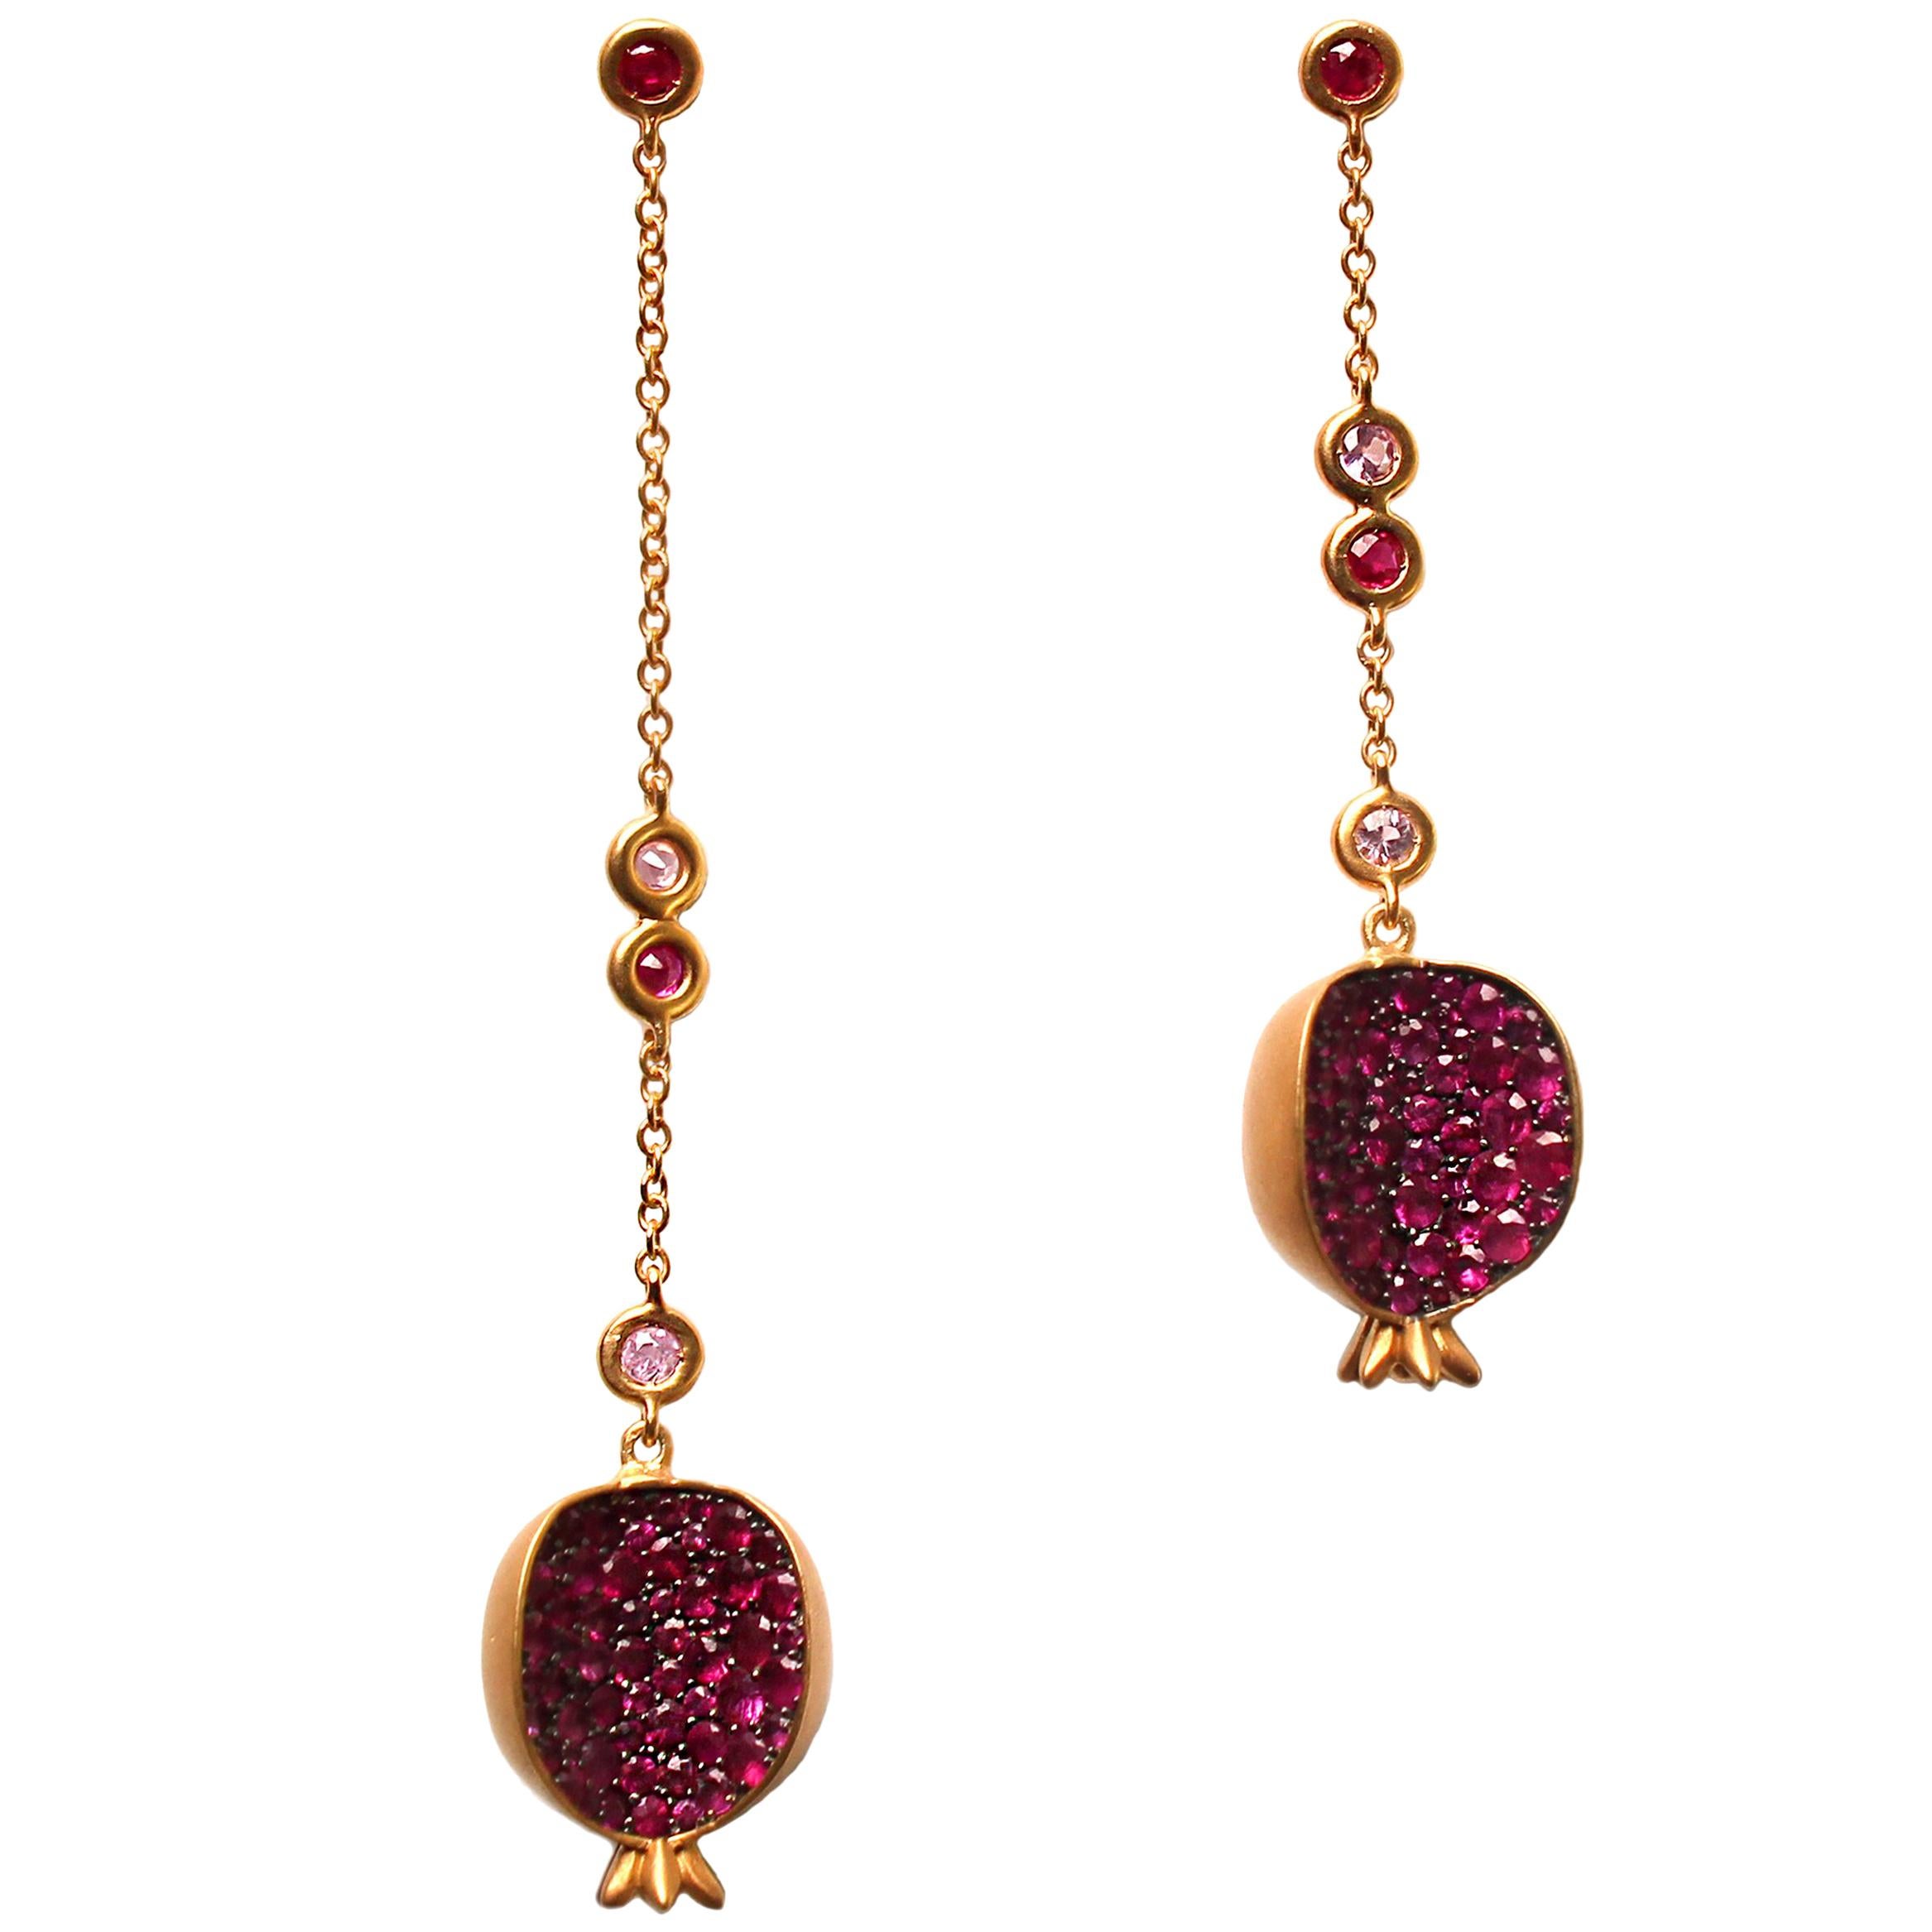 Clarissa Bronfman 14K Gold, Gold Plate, Ruby, Pink Sapphire Pomegranate Earrings